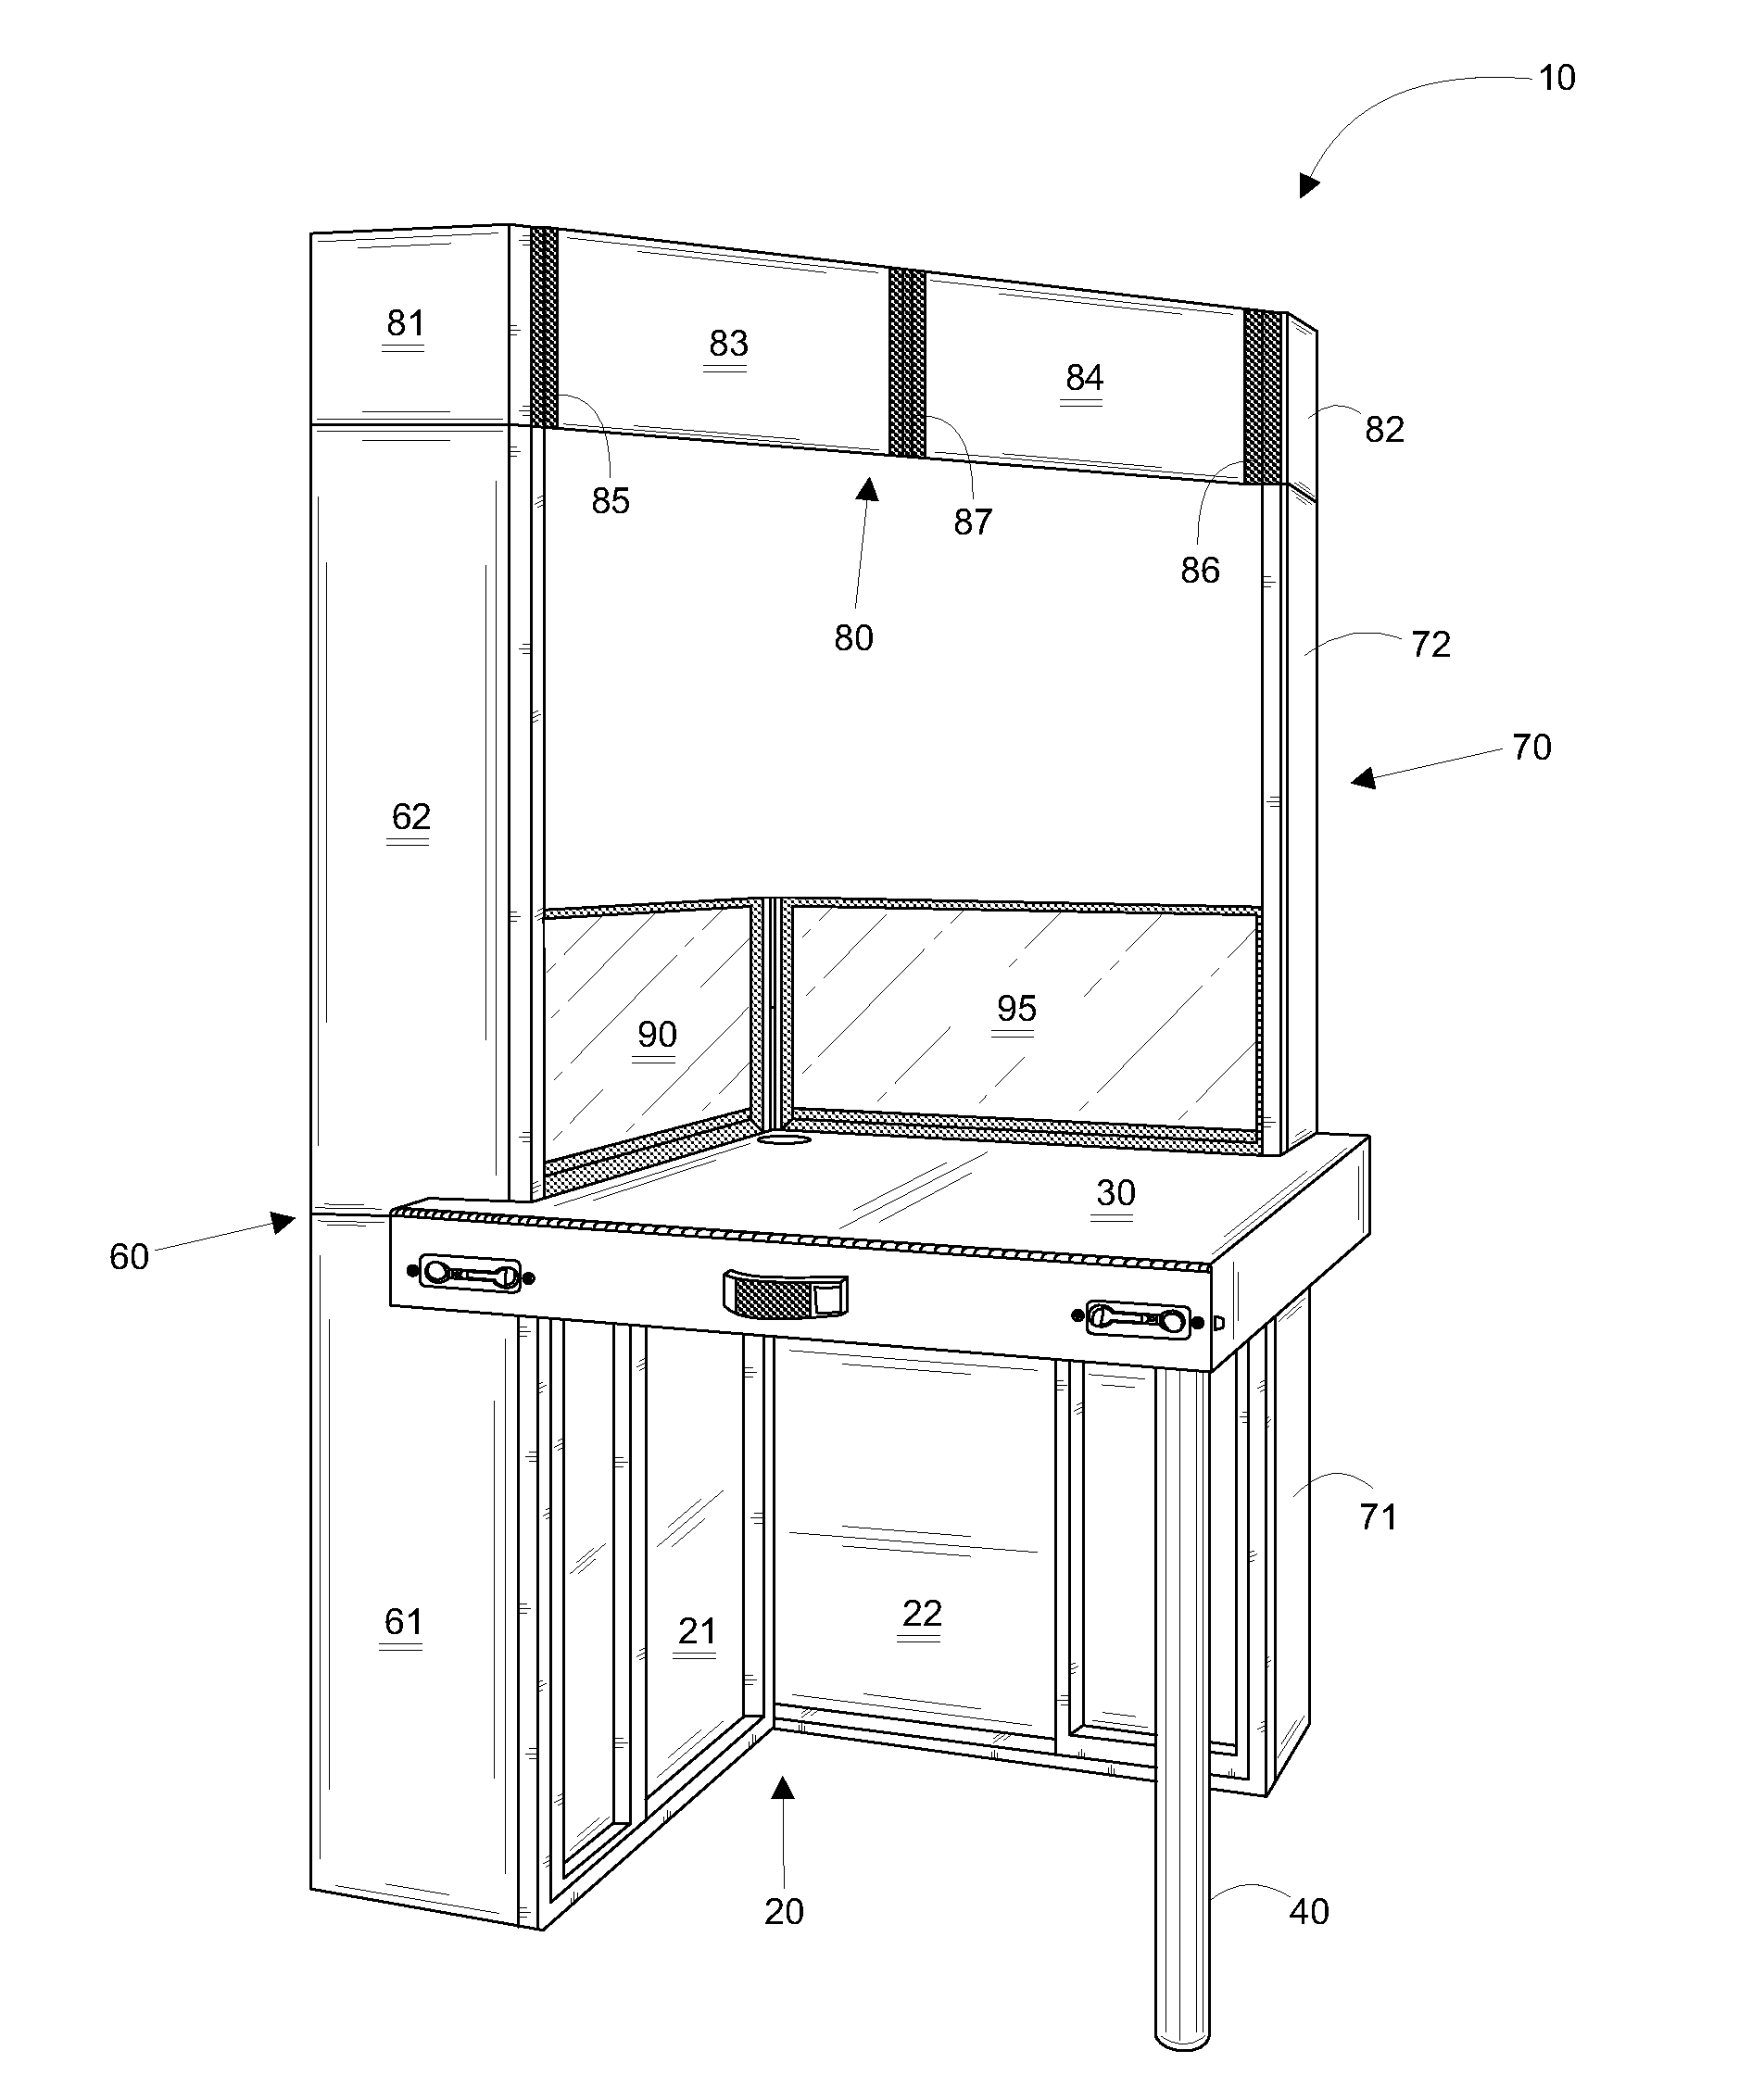 Dismantable writing desk storable in a case